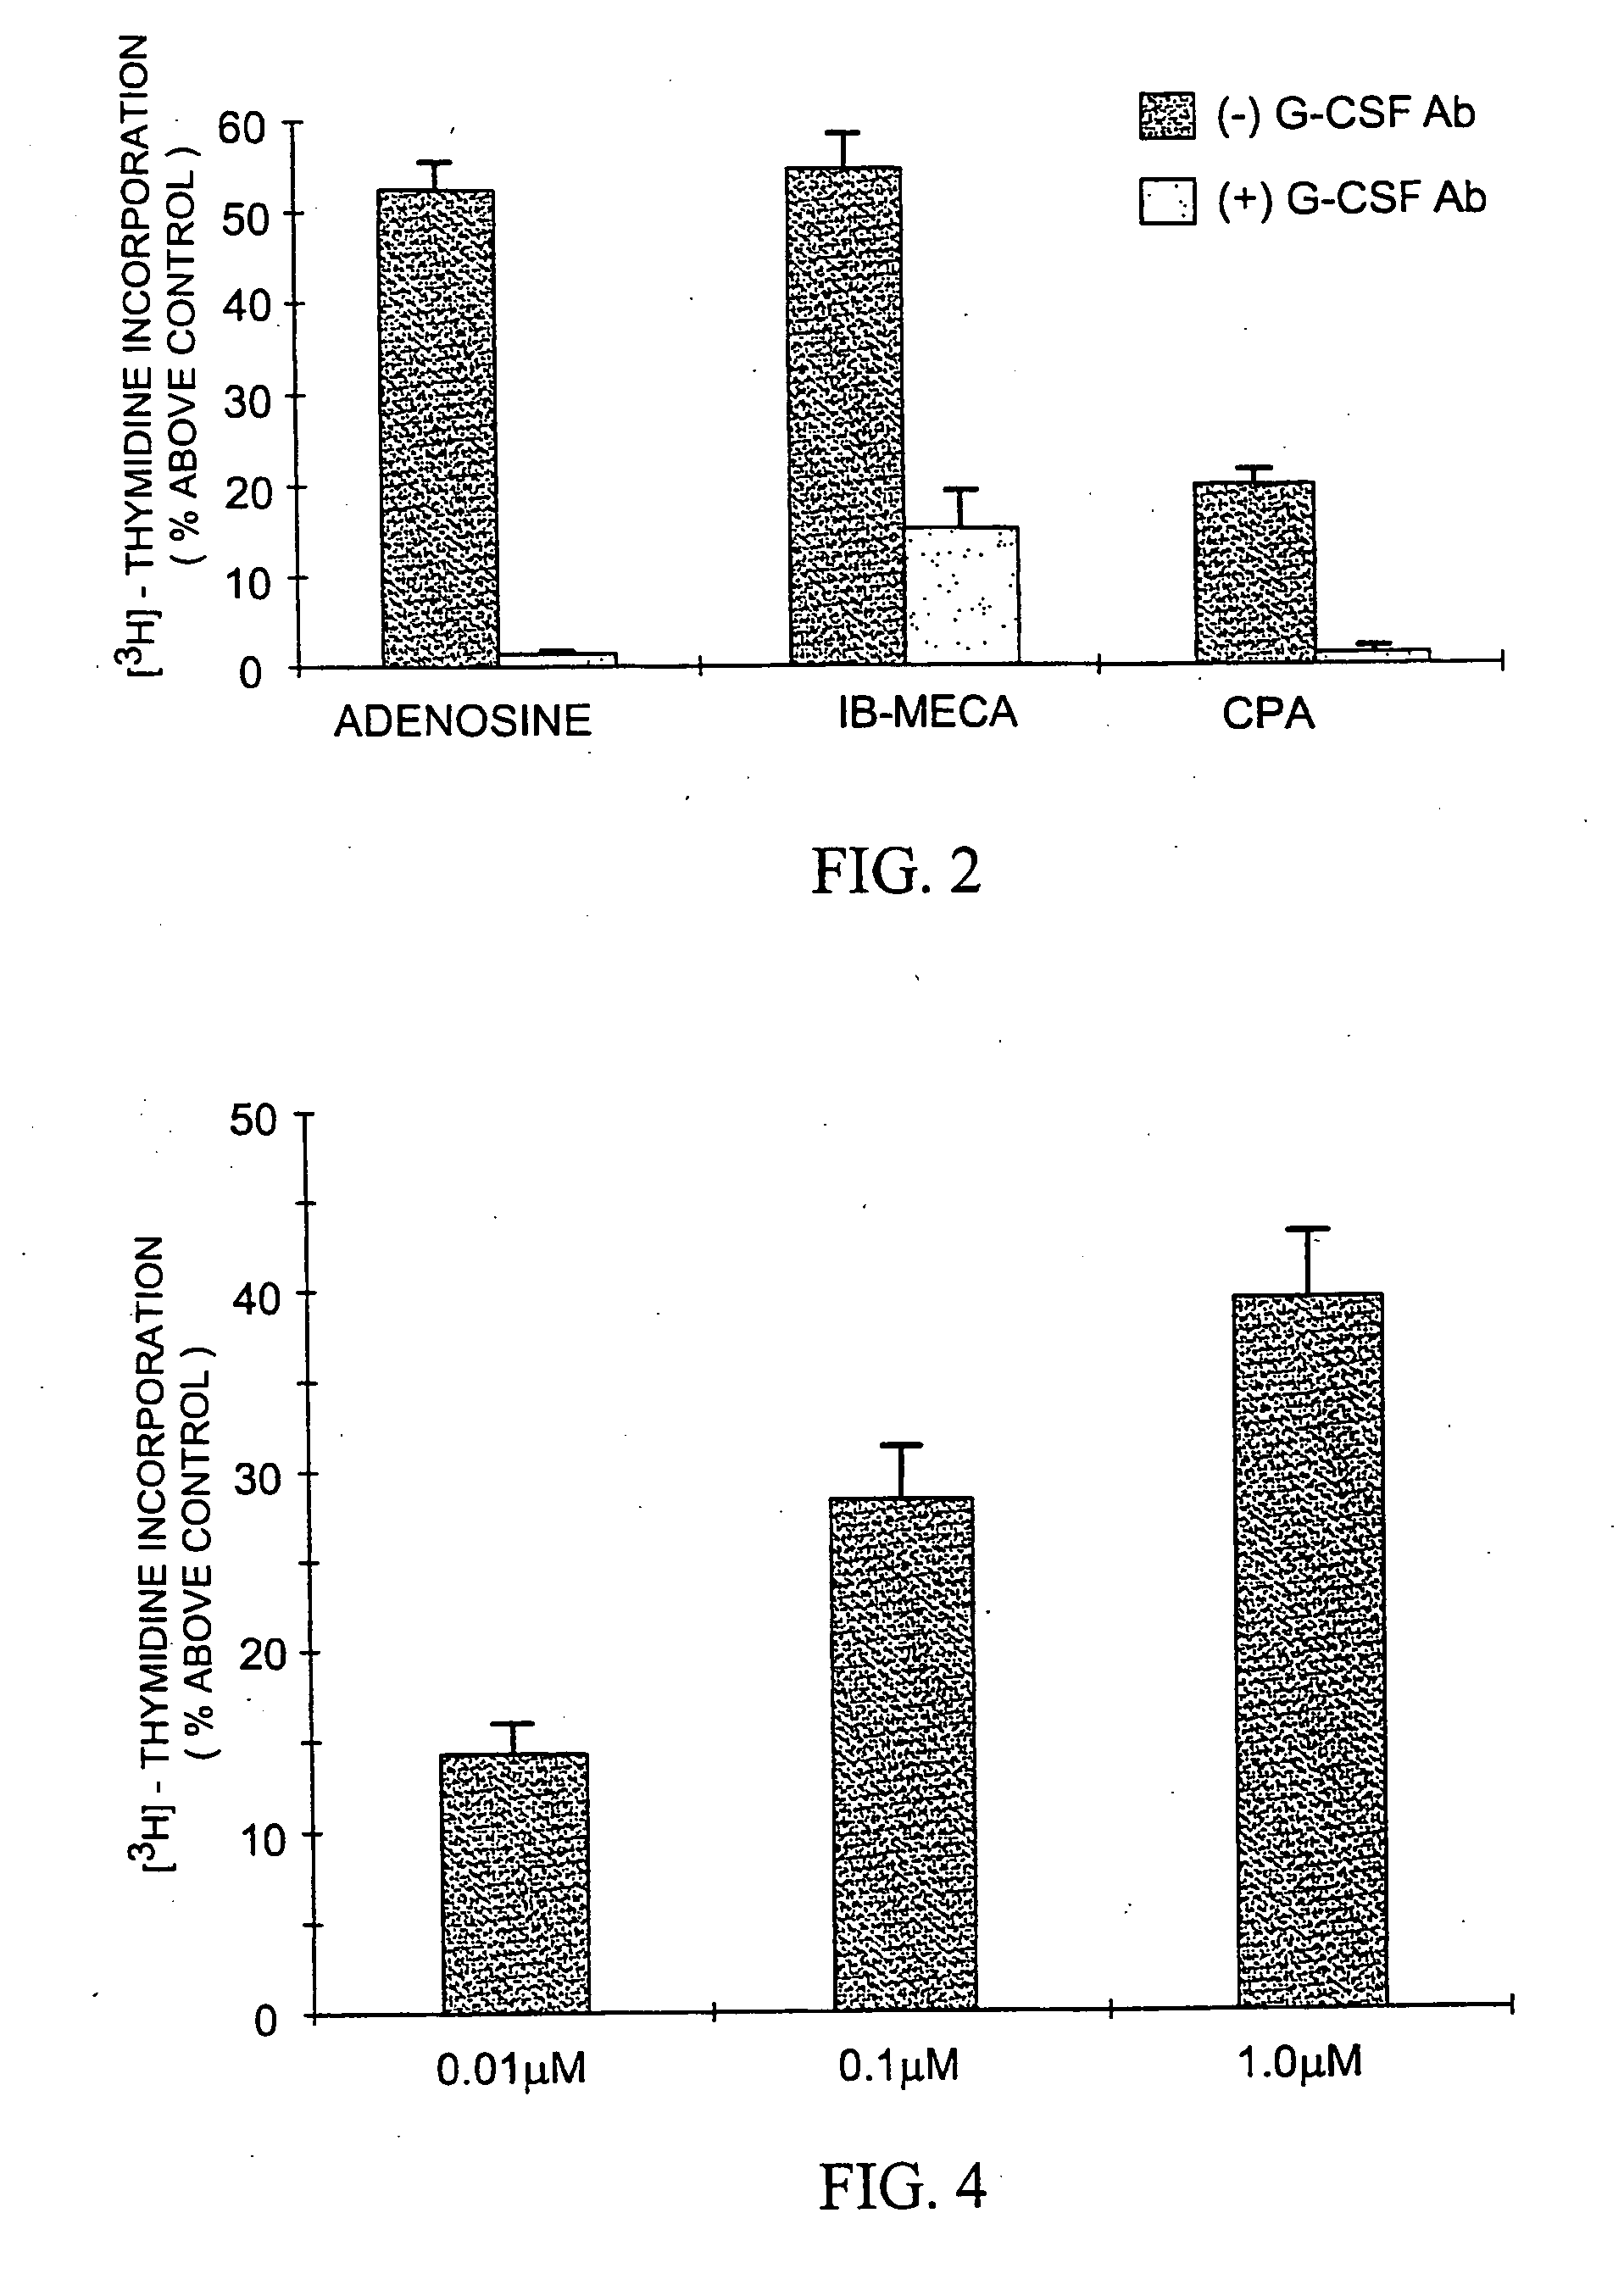 Pharmaceutical compositions comprising an adenosine receptor agonist or antagonist